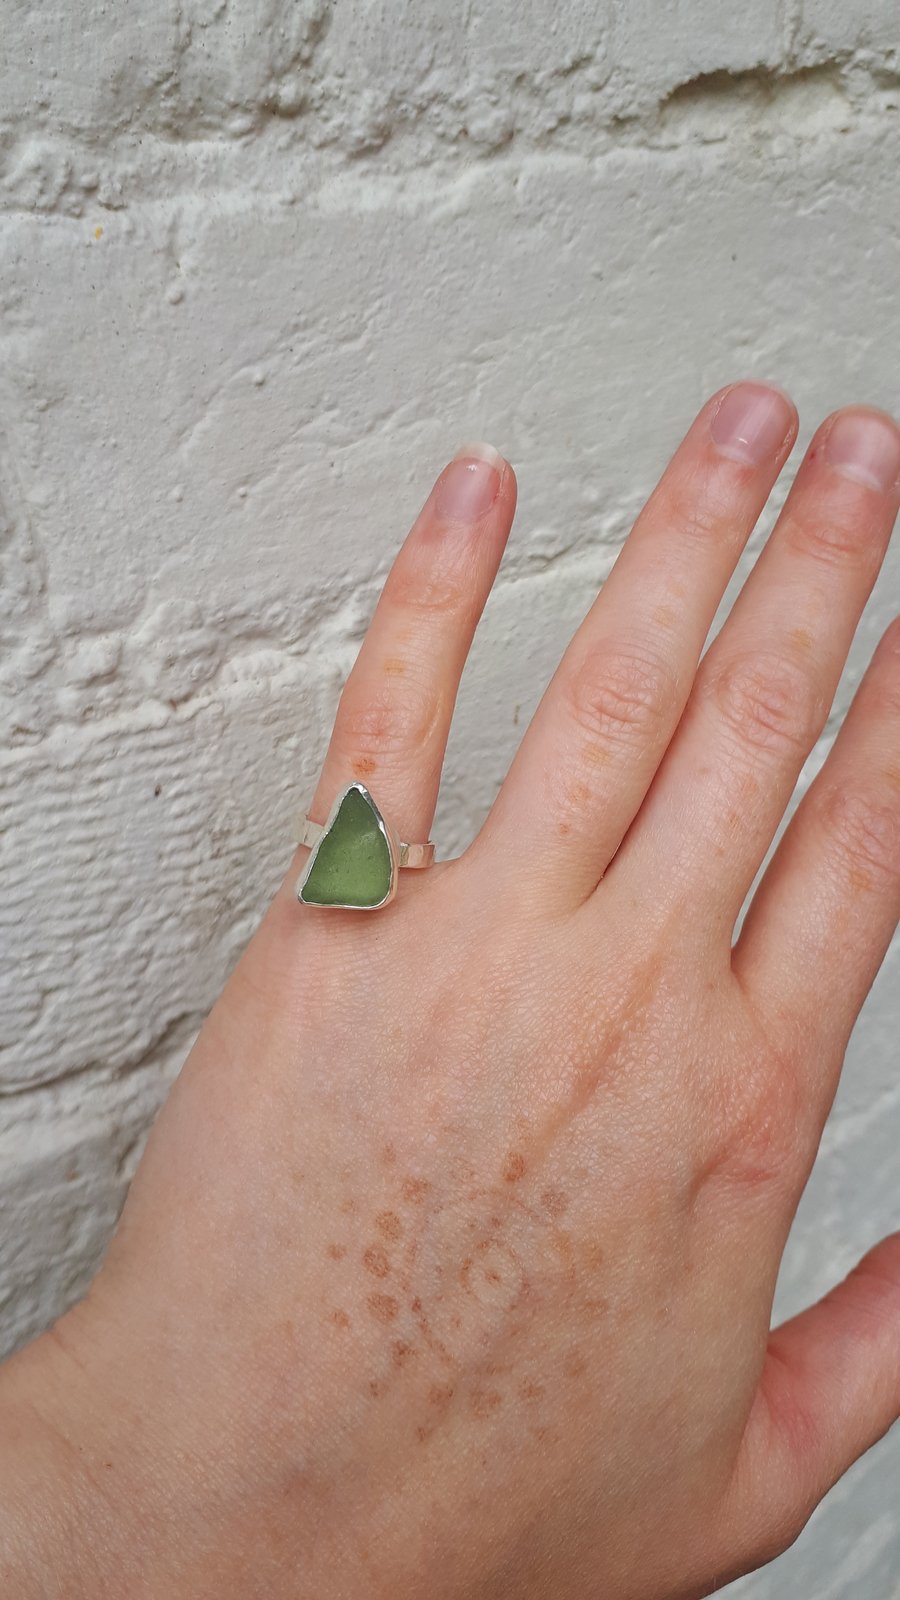 Light Olive green sea glass ring - Seconds Sunday 